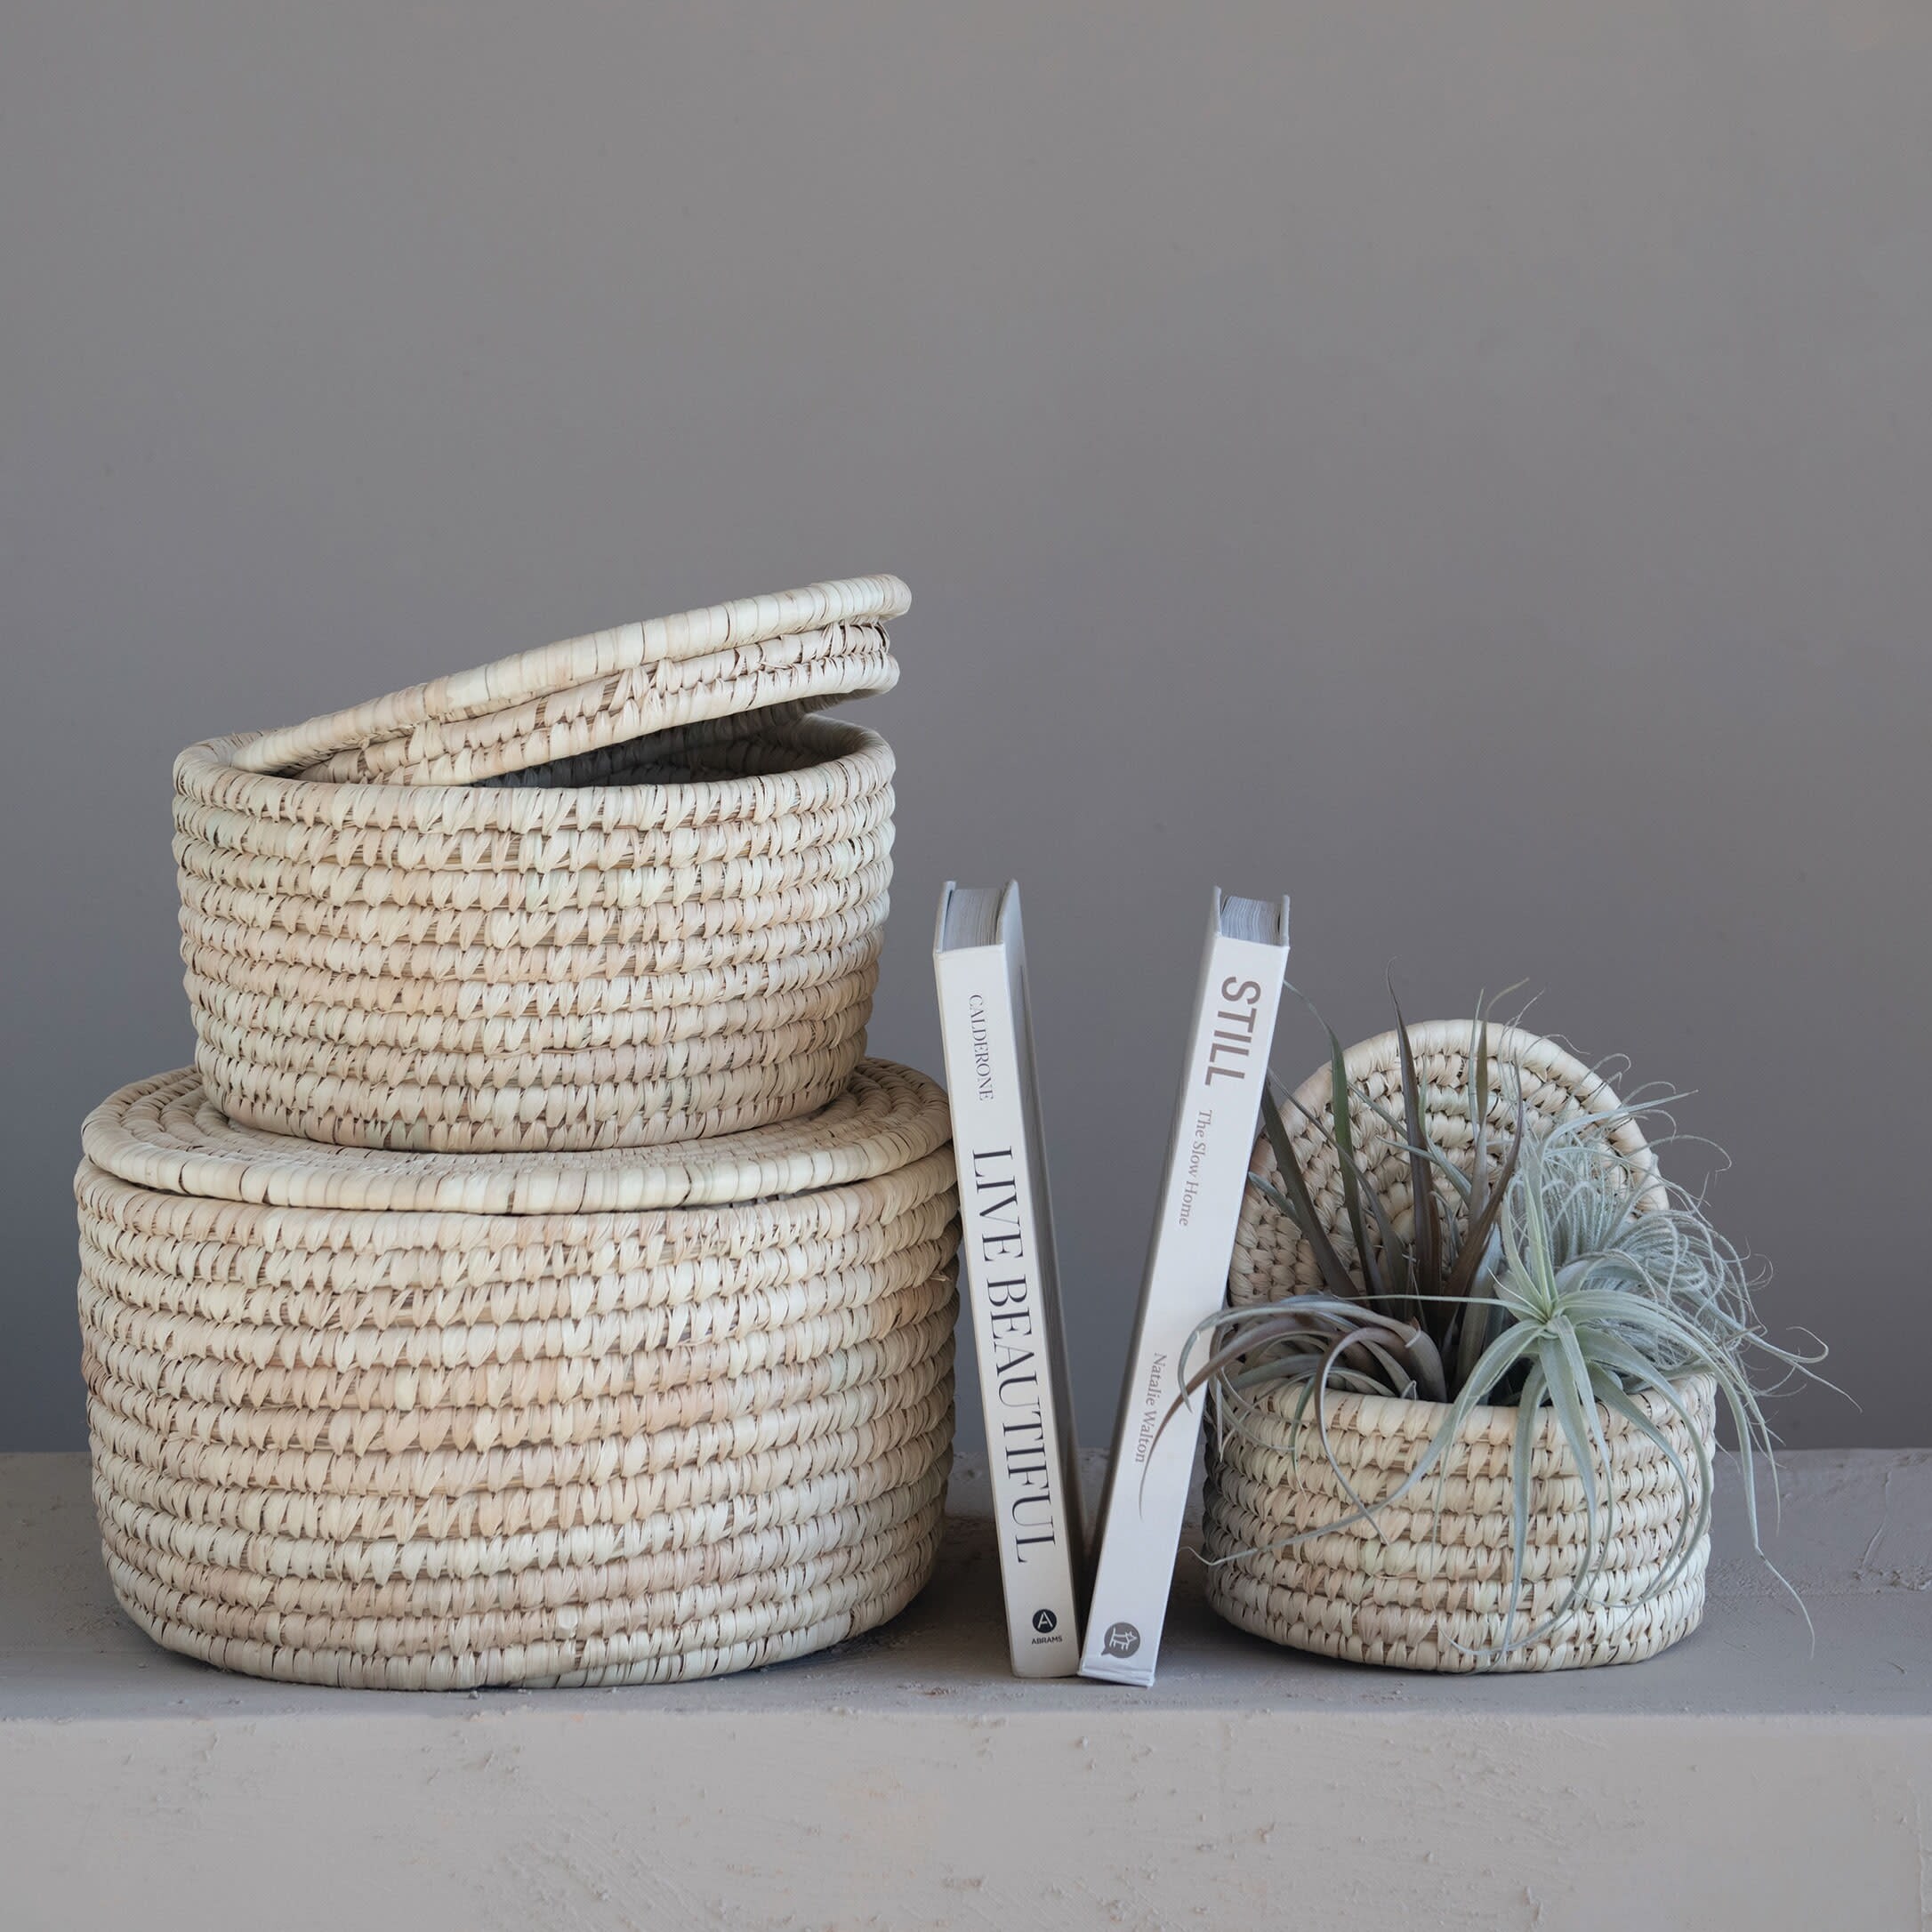 Hand-Woven Grass & Date Leaf Baskets with Lids, Set of 3